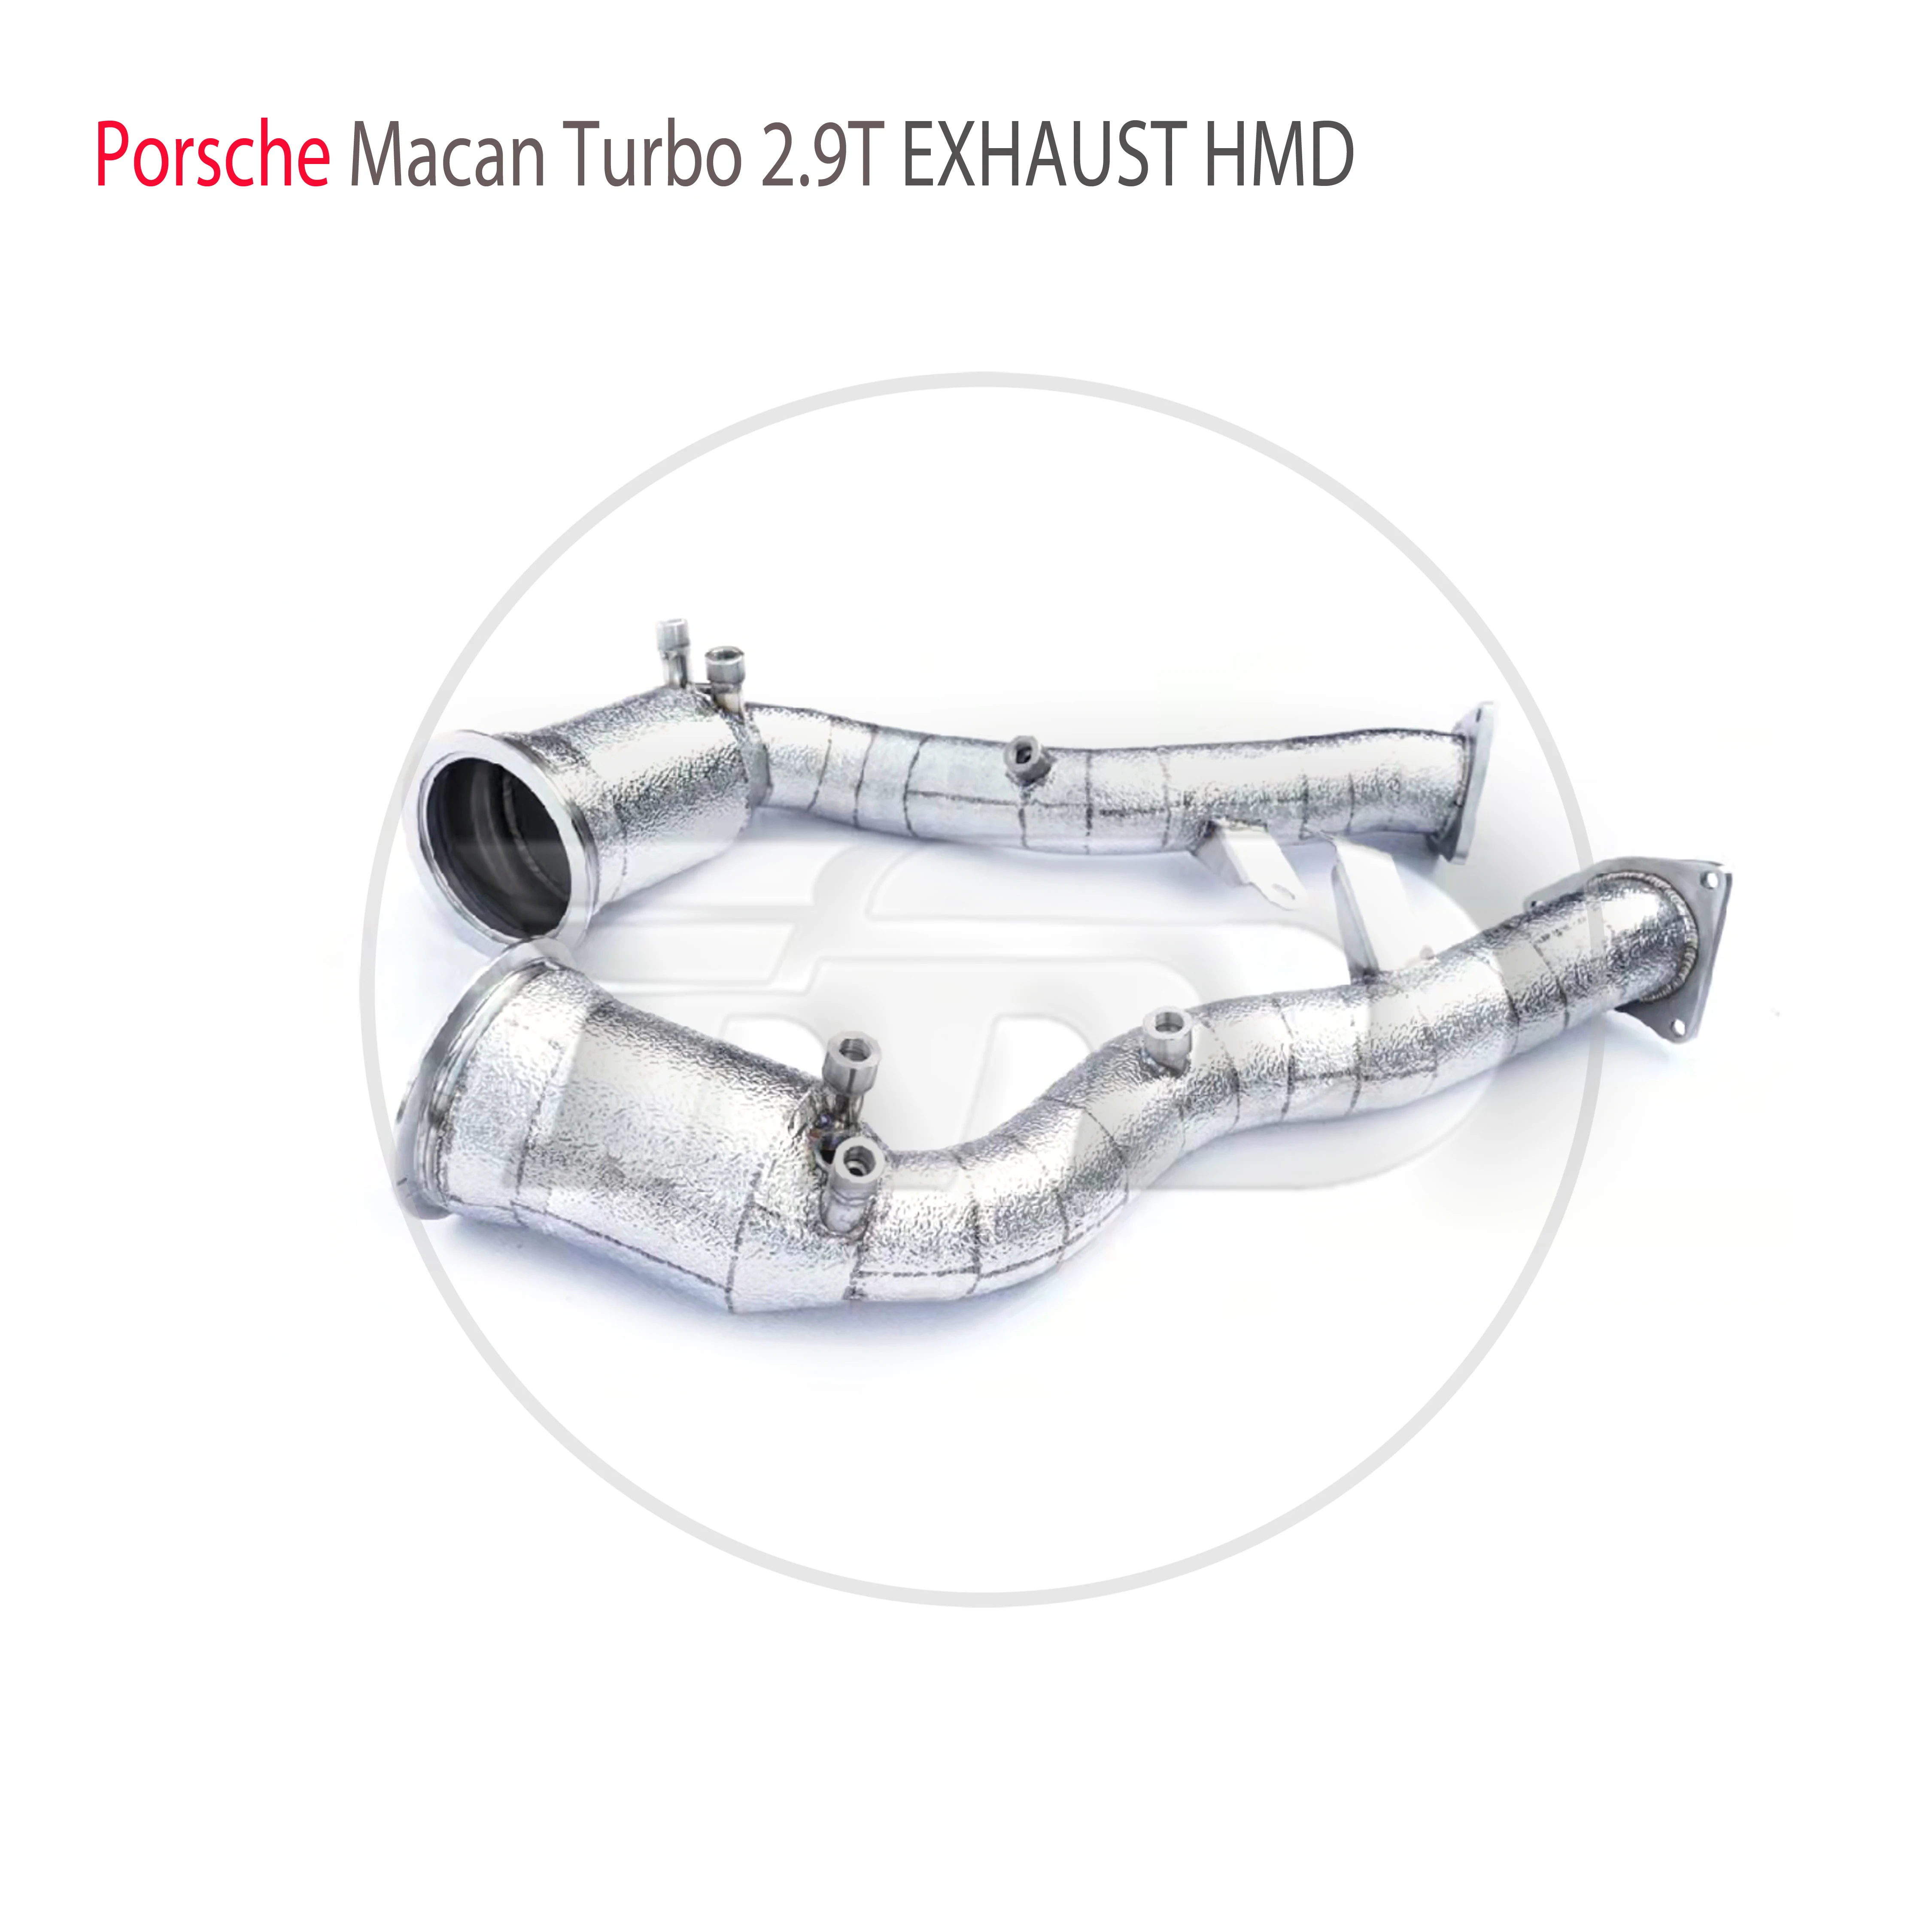 

HMD Exhaust System High Flow Performance Downpipe for Porsche Macan Turbo 2.9T Car Accessories Converter Header With Catalyst